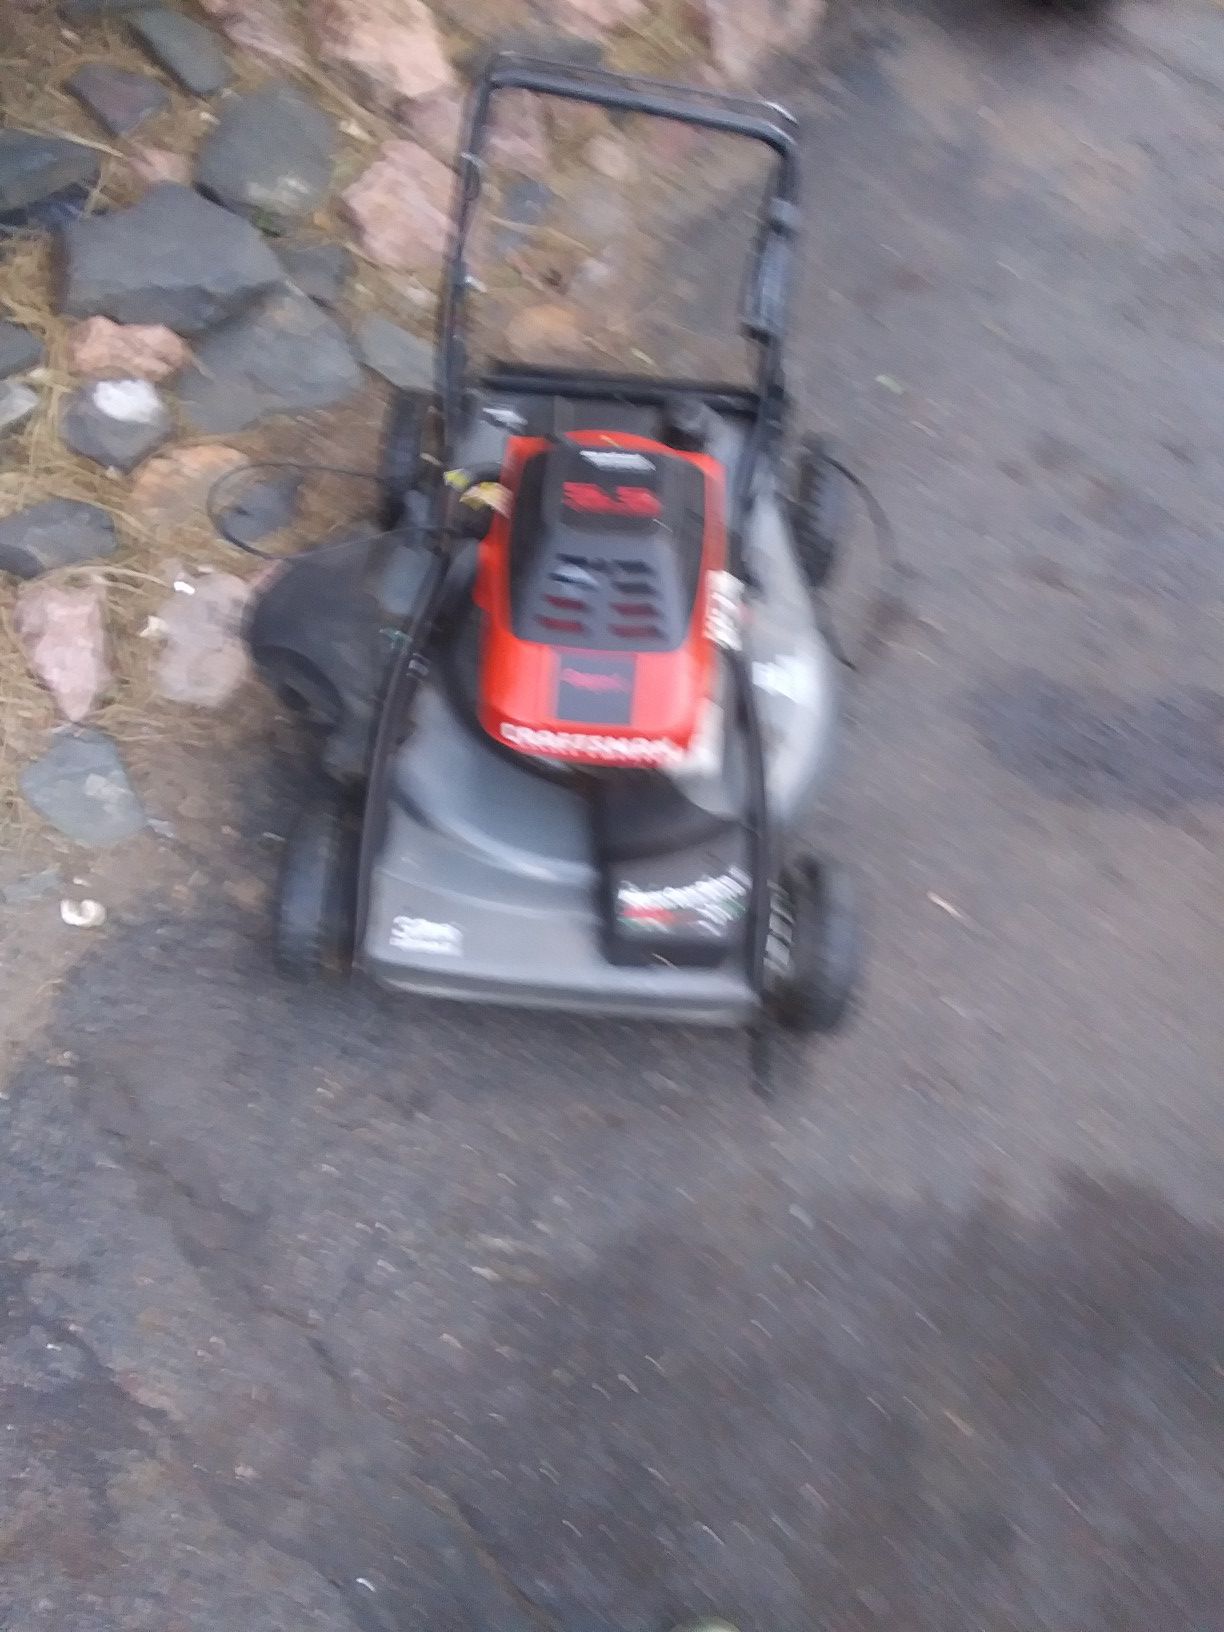 Craftsman 5.5 selfperpeled lawnmower with 2 bags